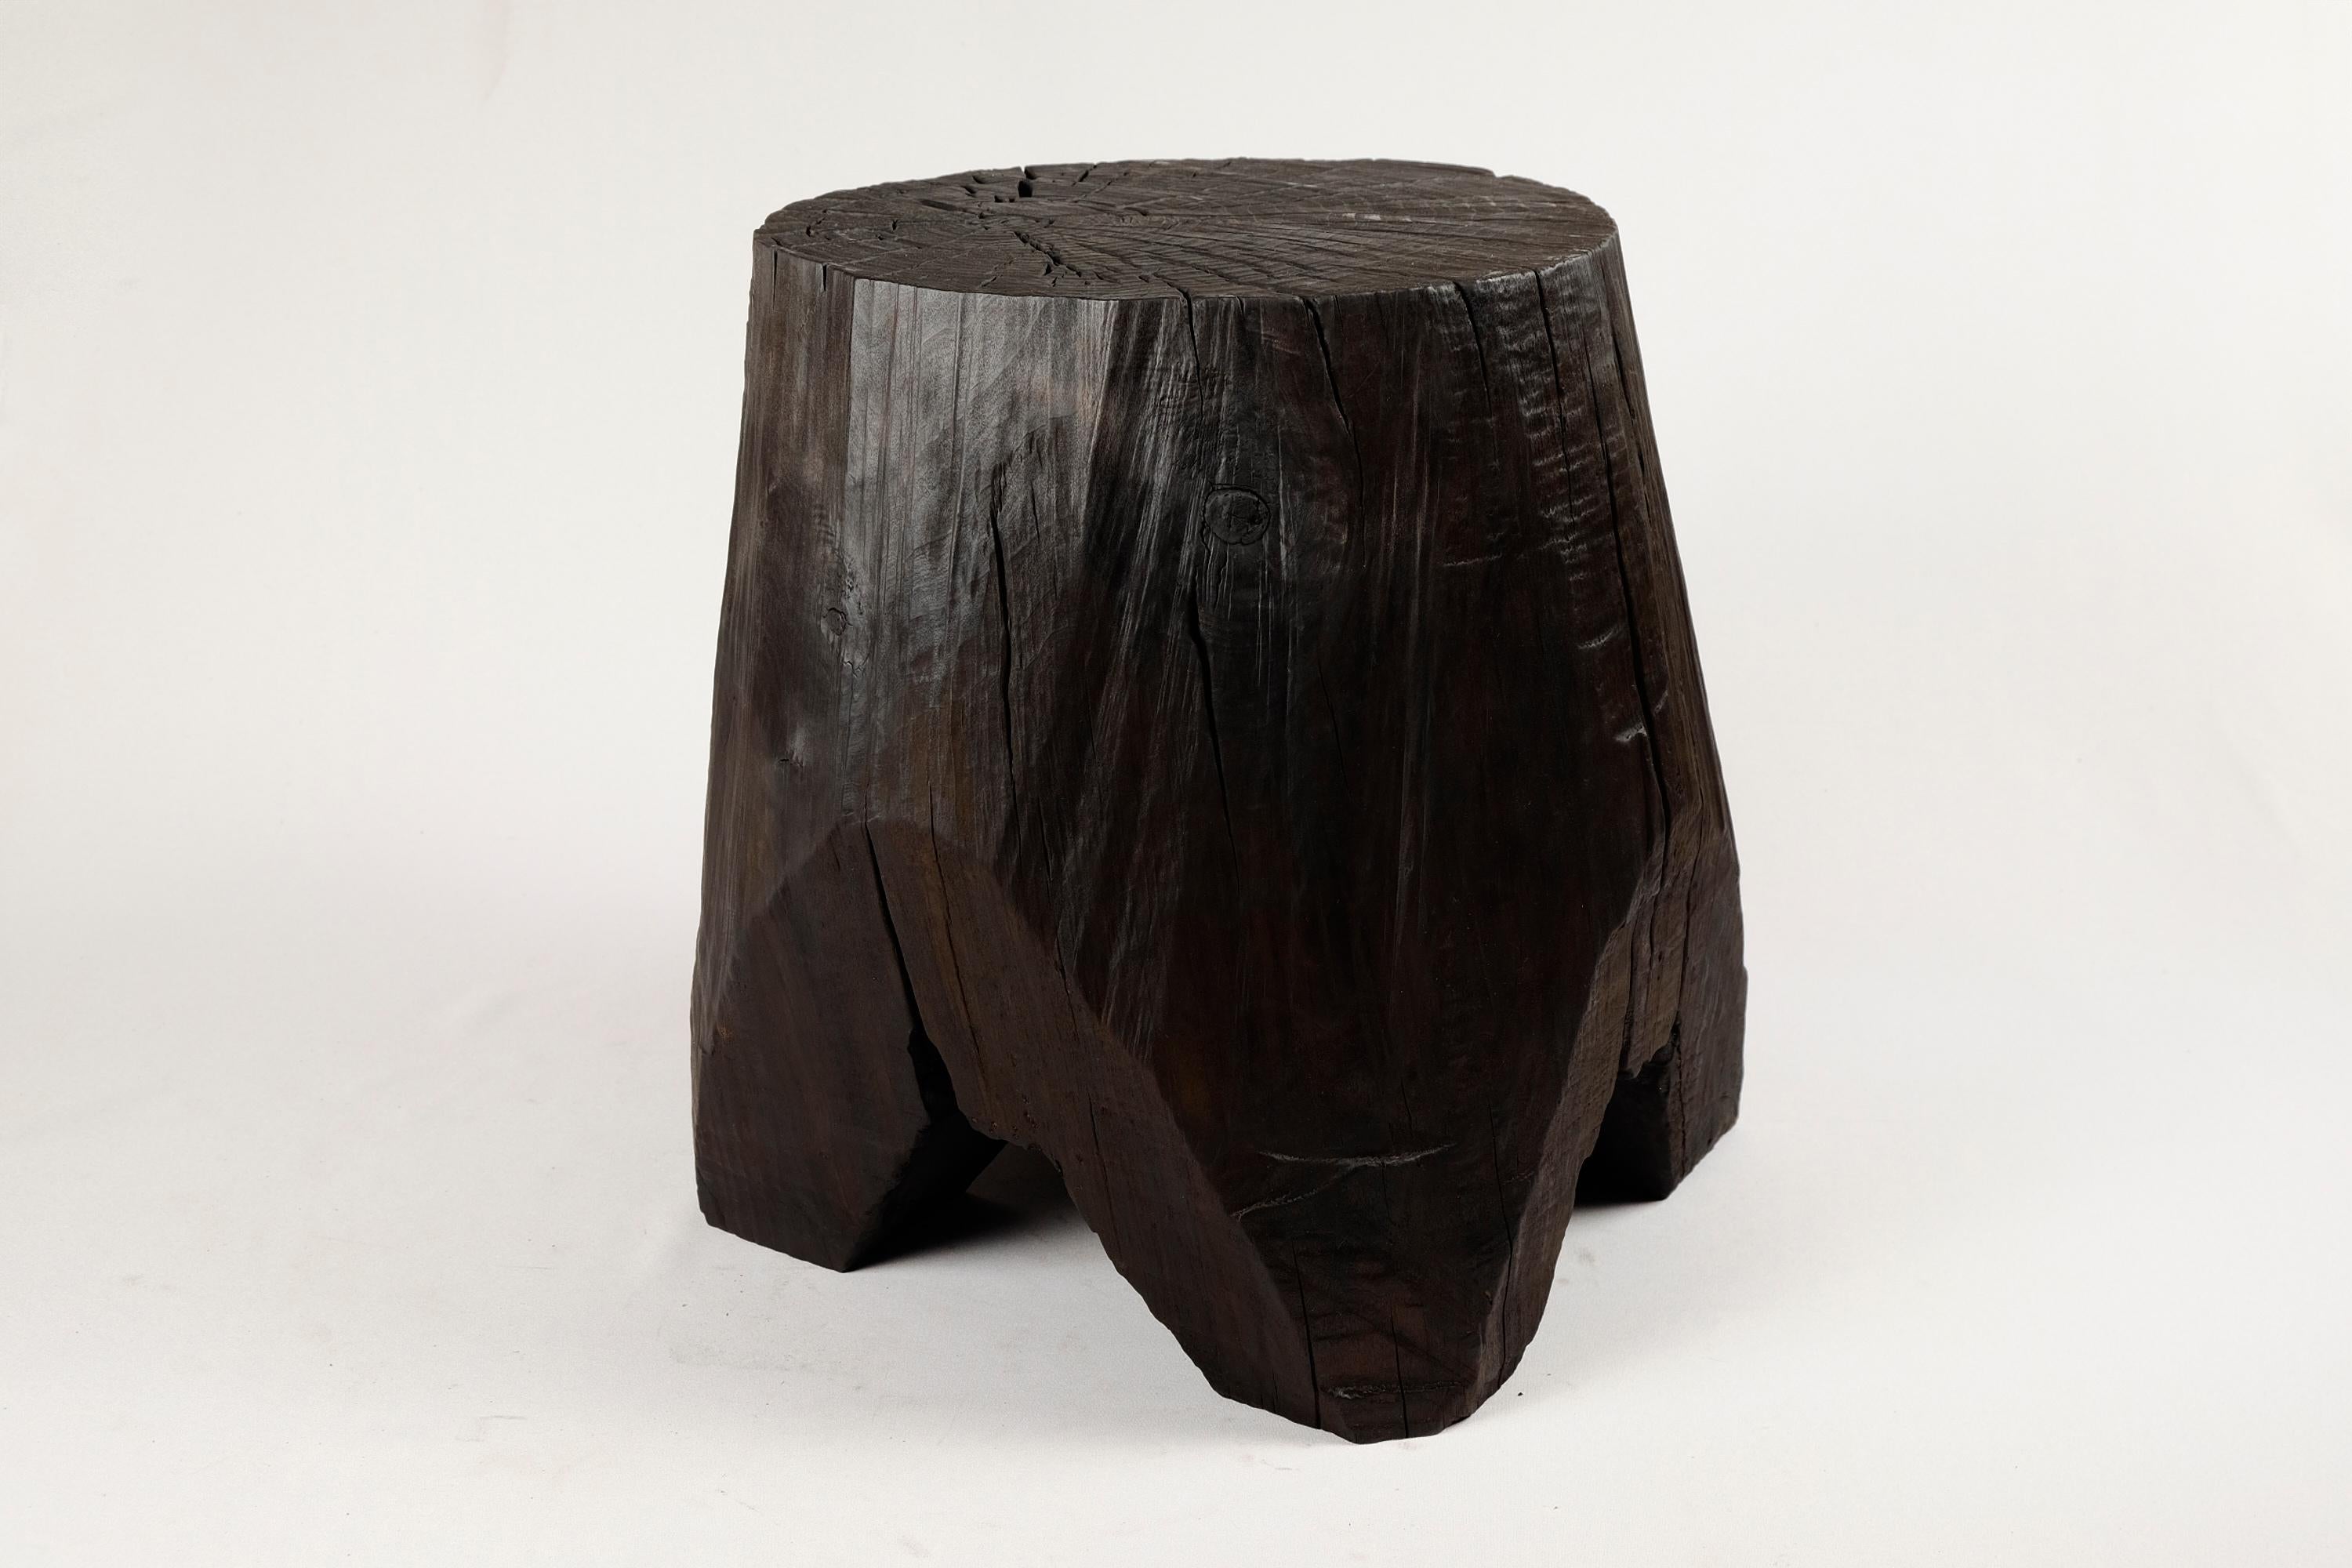 Solid Burnt Wood, Side Table, Stool, Original Contemporary Design 1